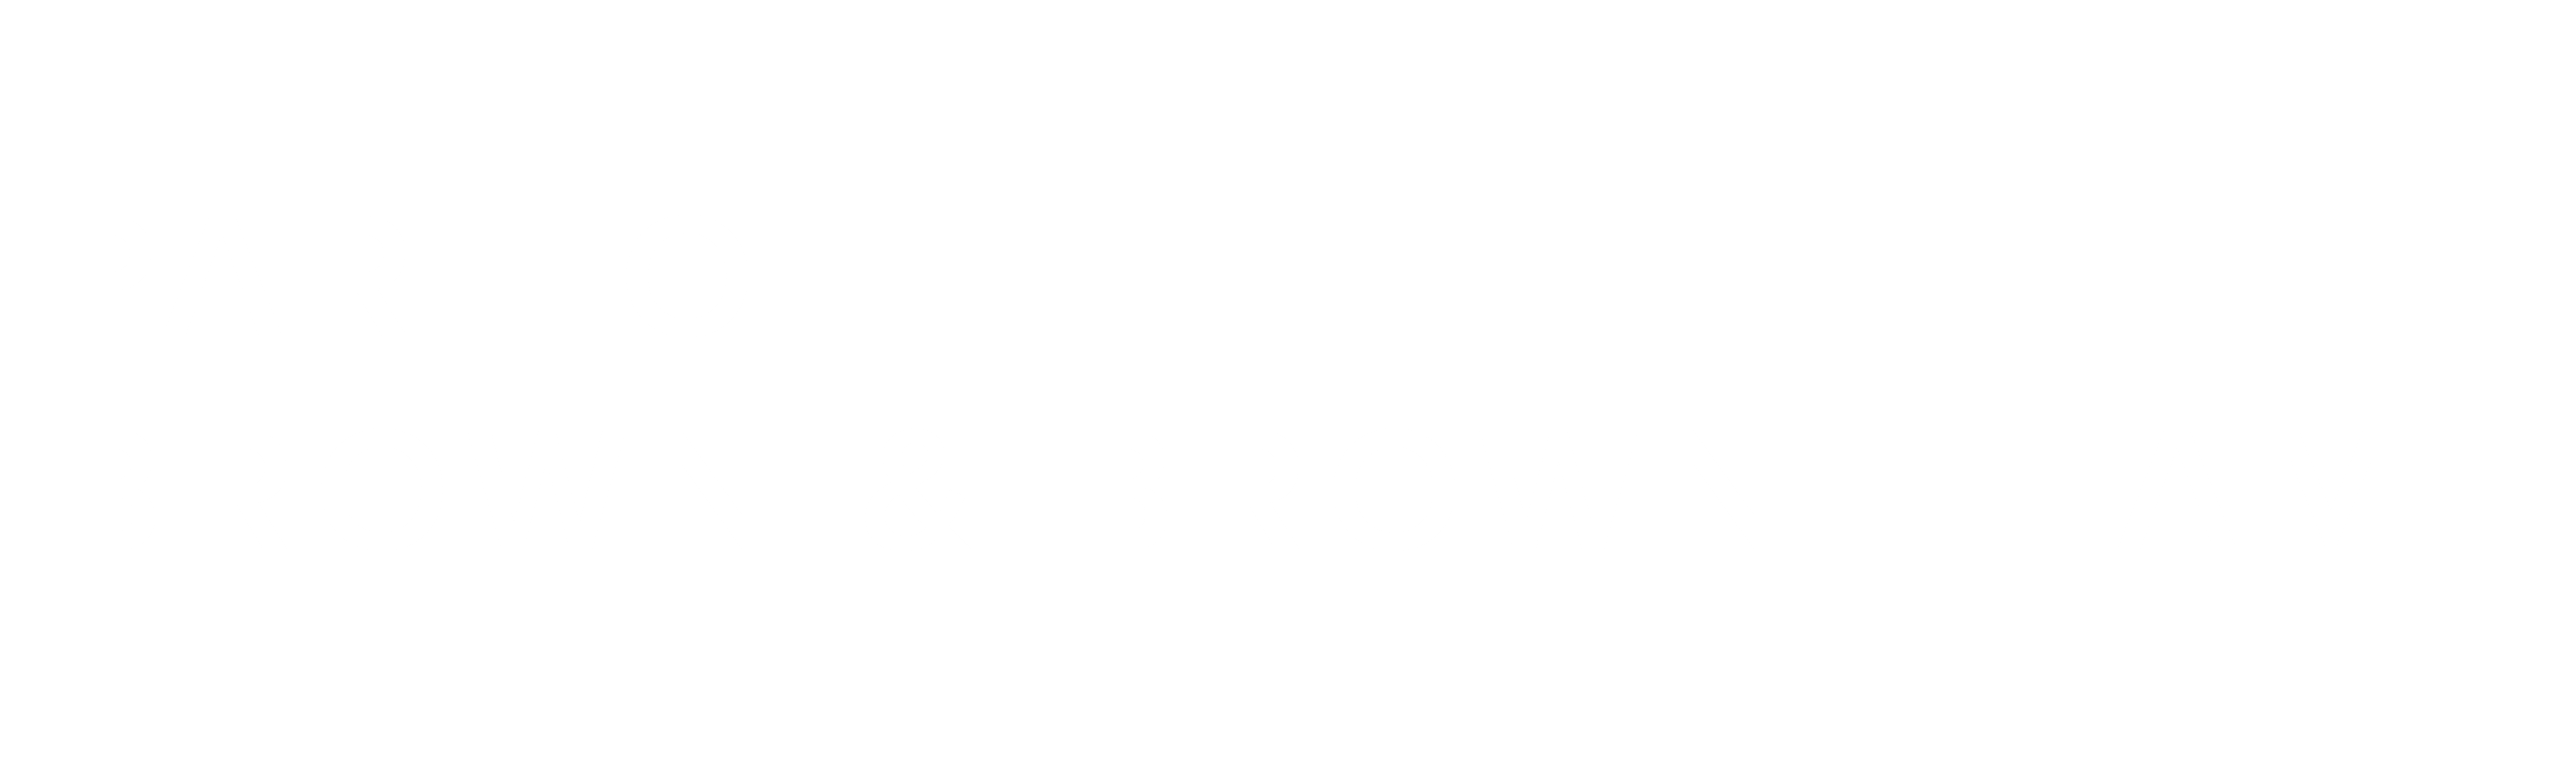 Part of the Brown & Brown Team logo white